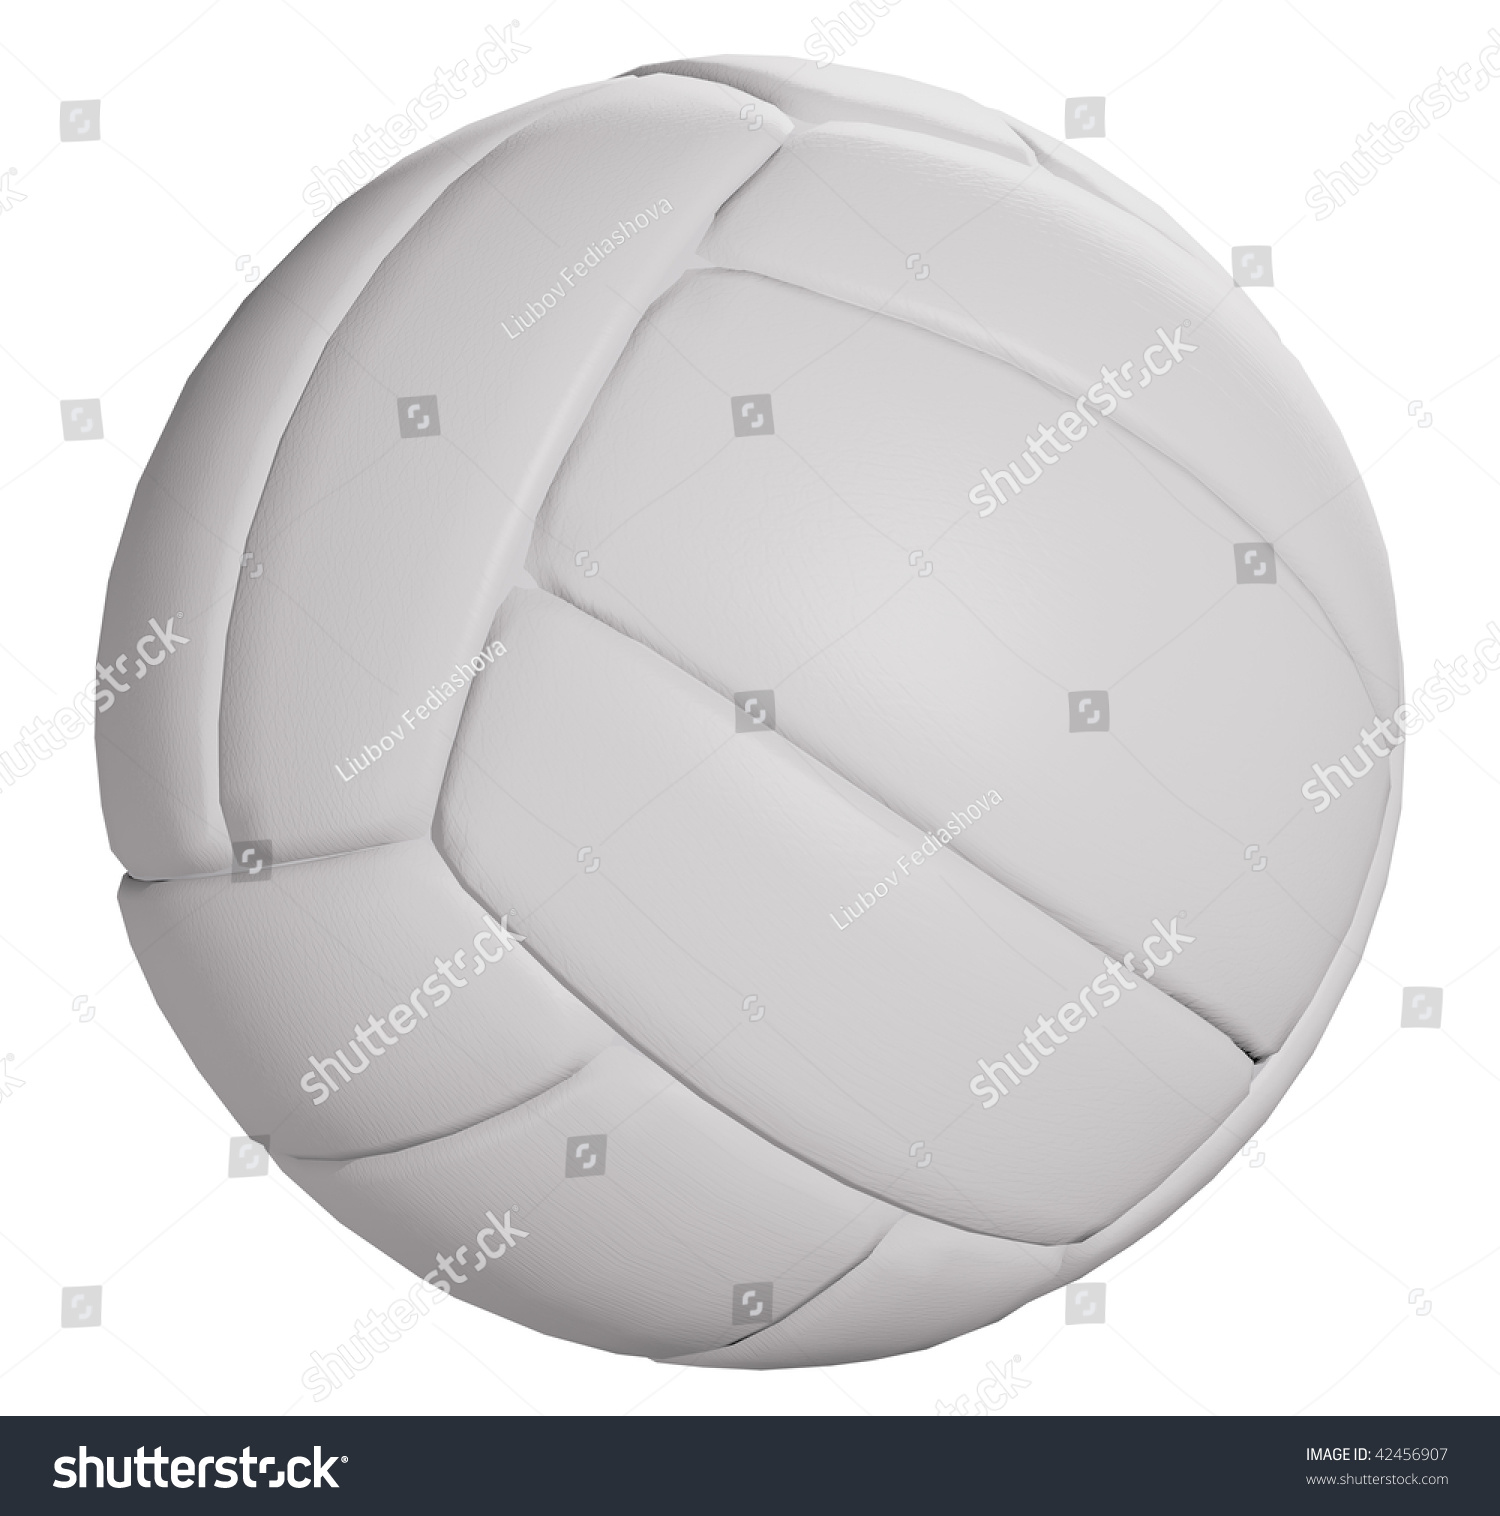 Volleyball Ball Isolated On White Background With Clipping Path Stock ...